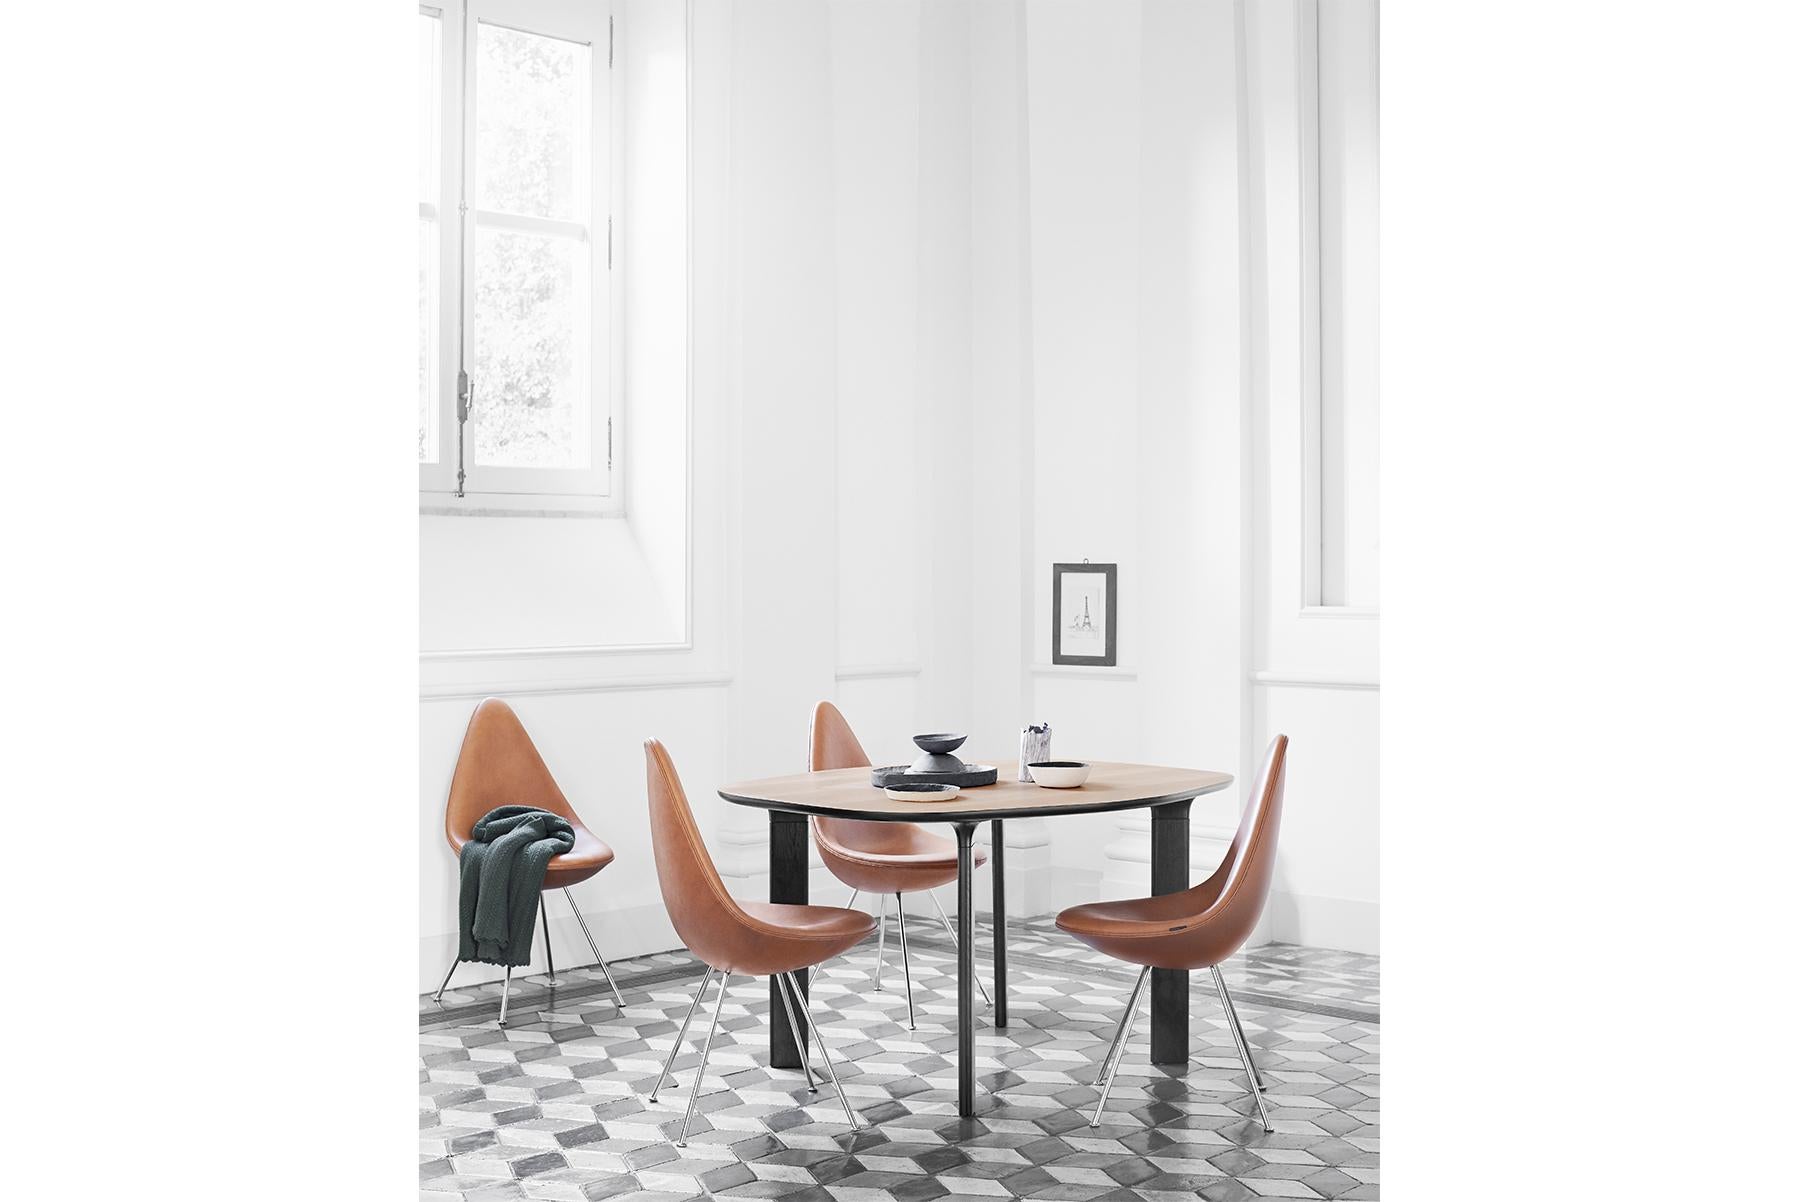 The fully upholstered Drop™ blends elegantly into a wide variety of settings as a great example of furniture design that is able to influence and elevate an entire room by its mere presence and beauty. Arne Jacobsen originally designed it for the